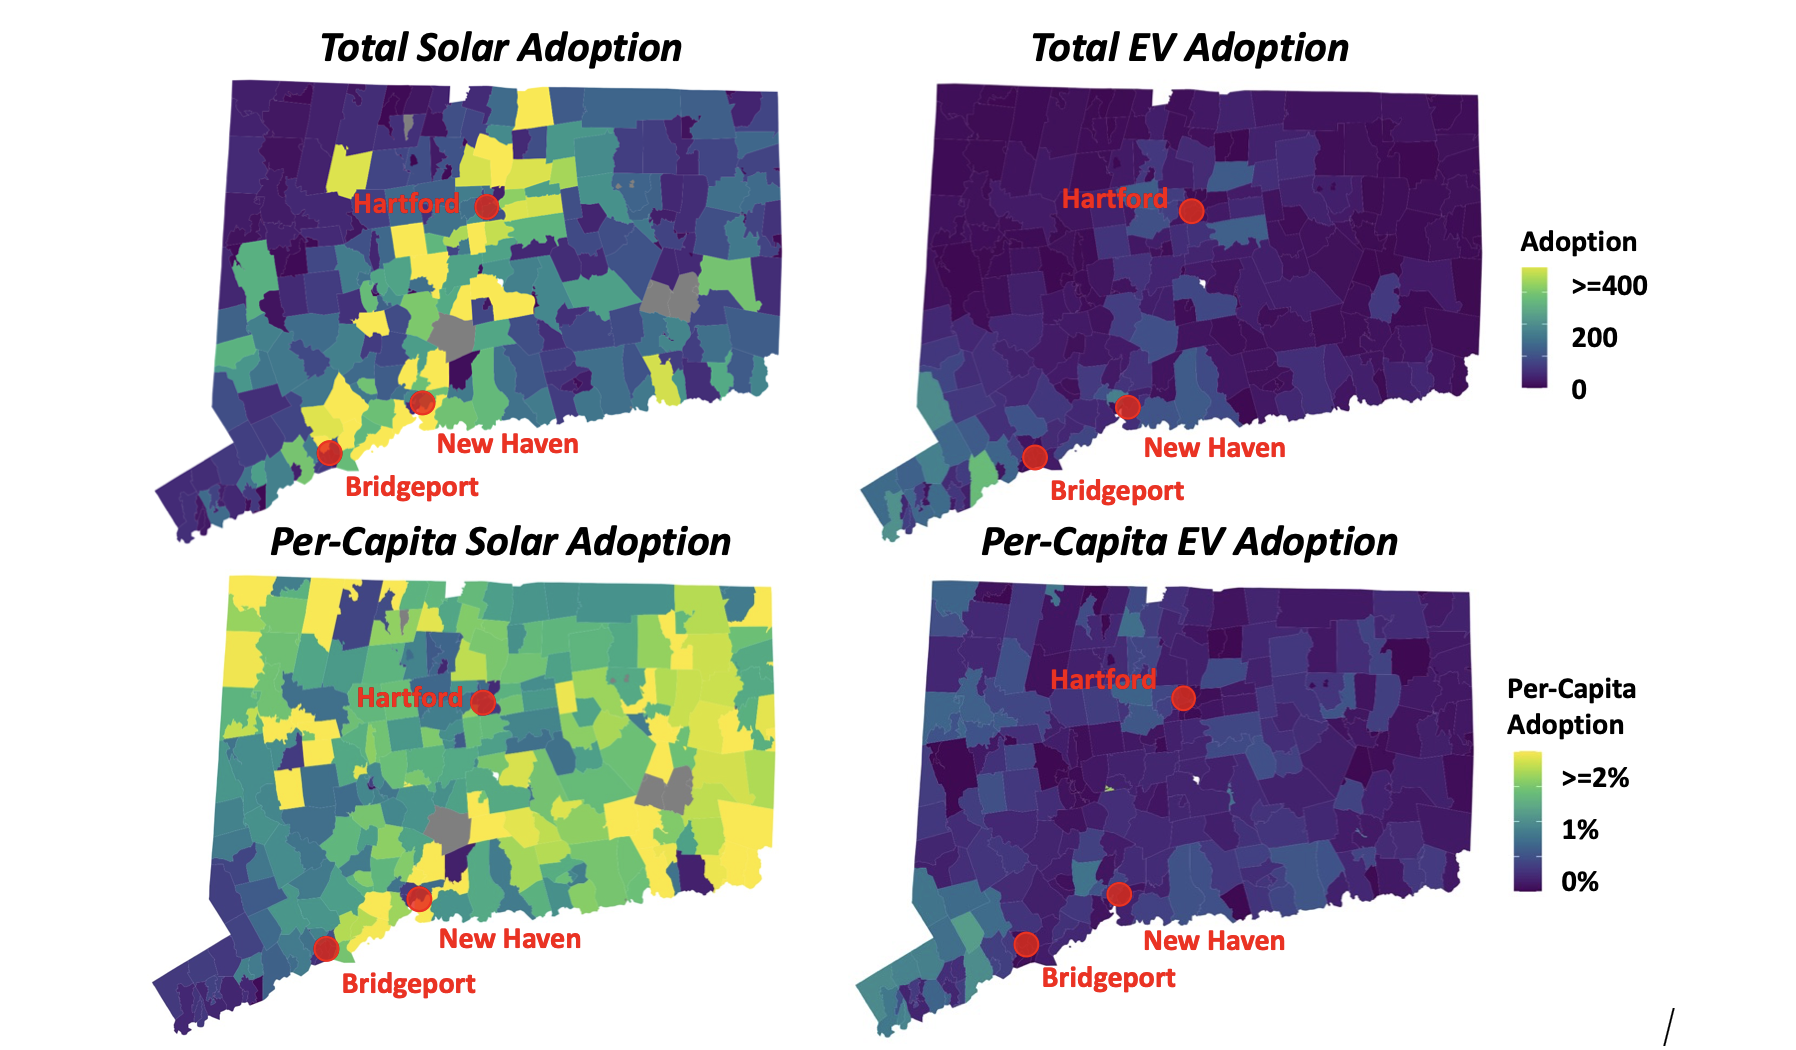 Where People Are Adopting EVs and Solar